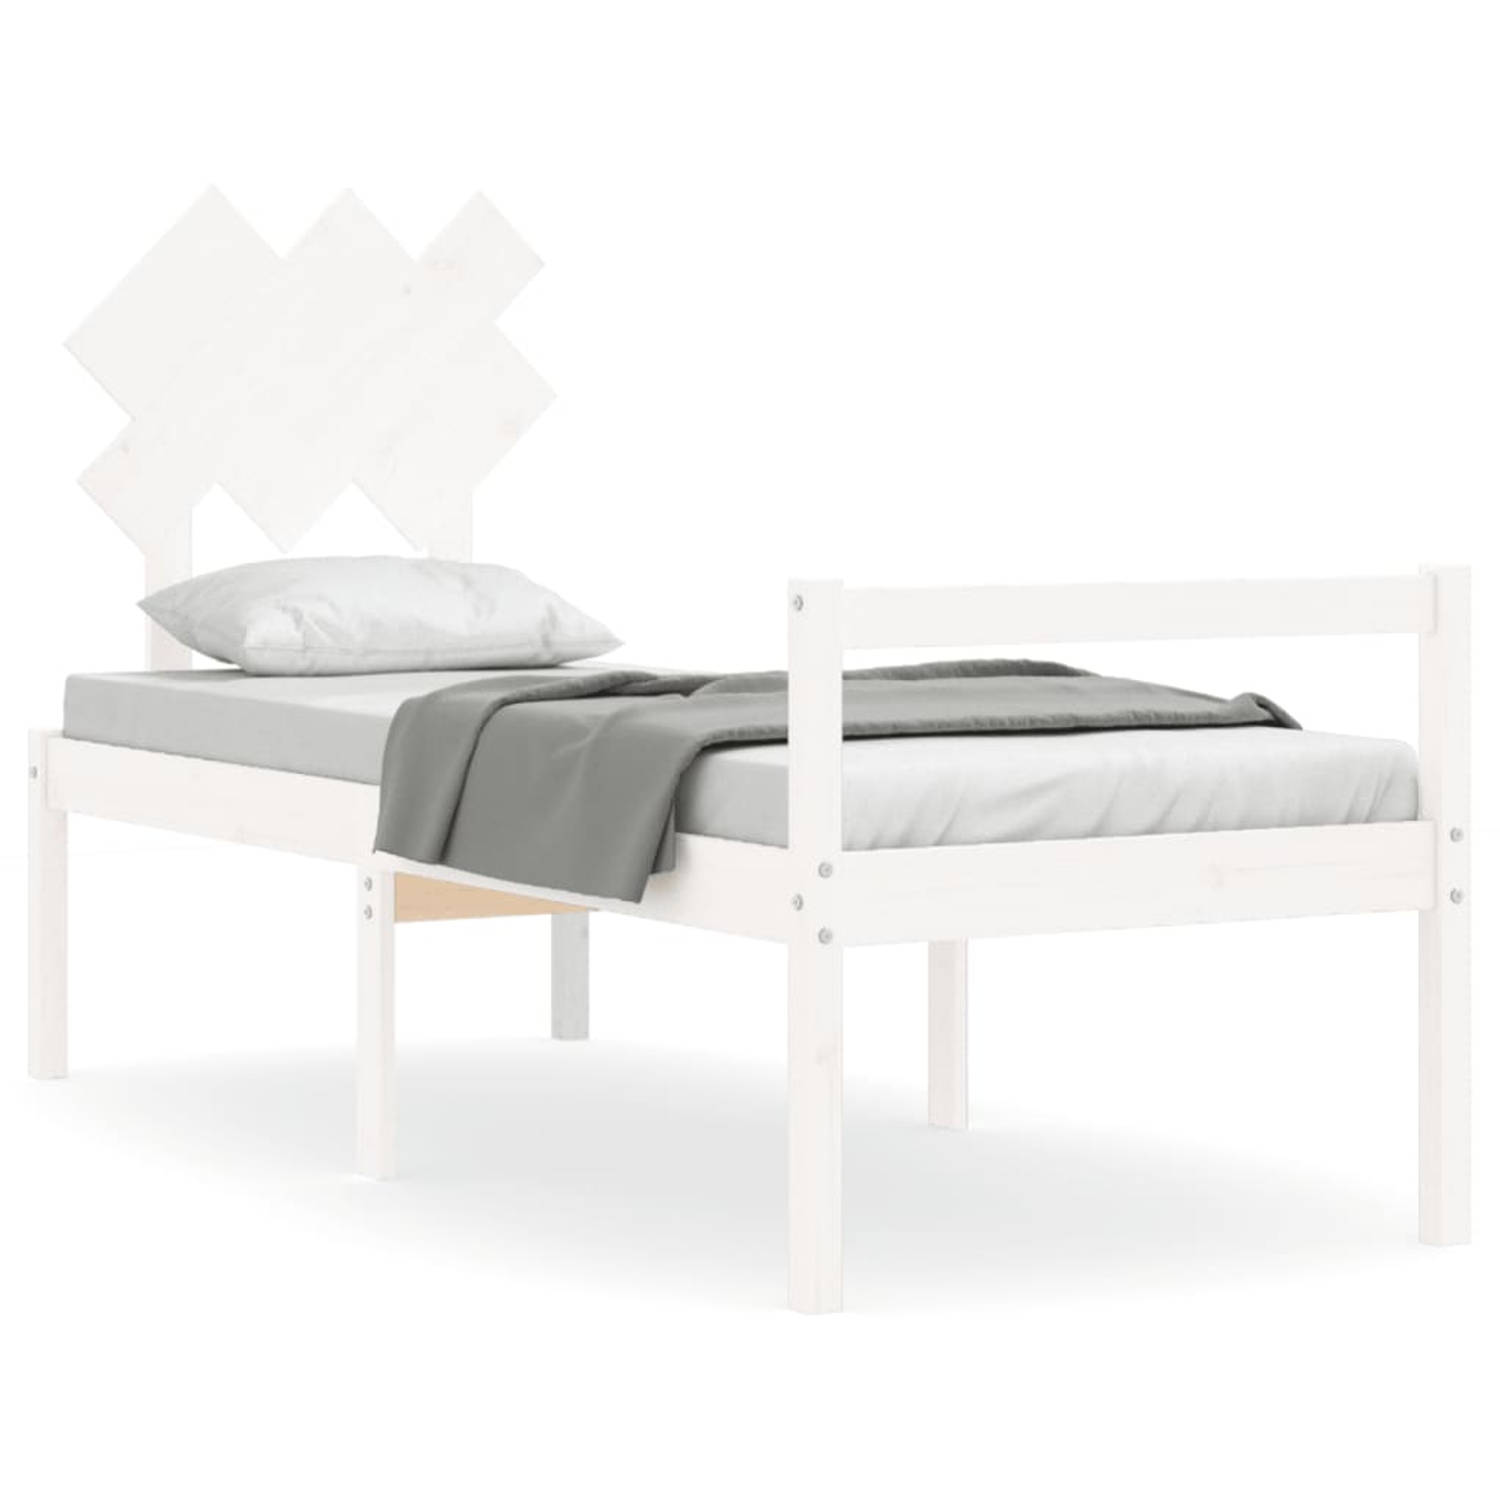 The Living Store Bed Grenenhout - Massief - 195.5 x 80.5 x 81 cm - Wit